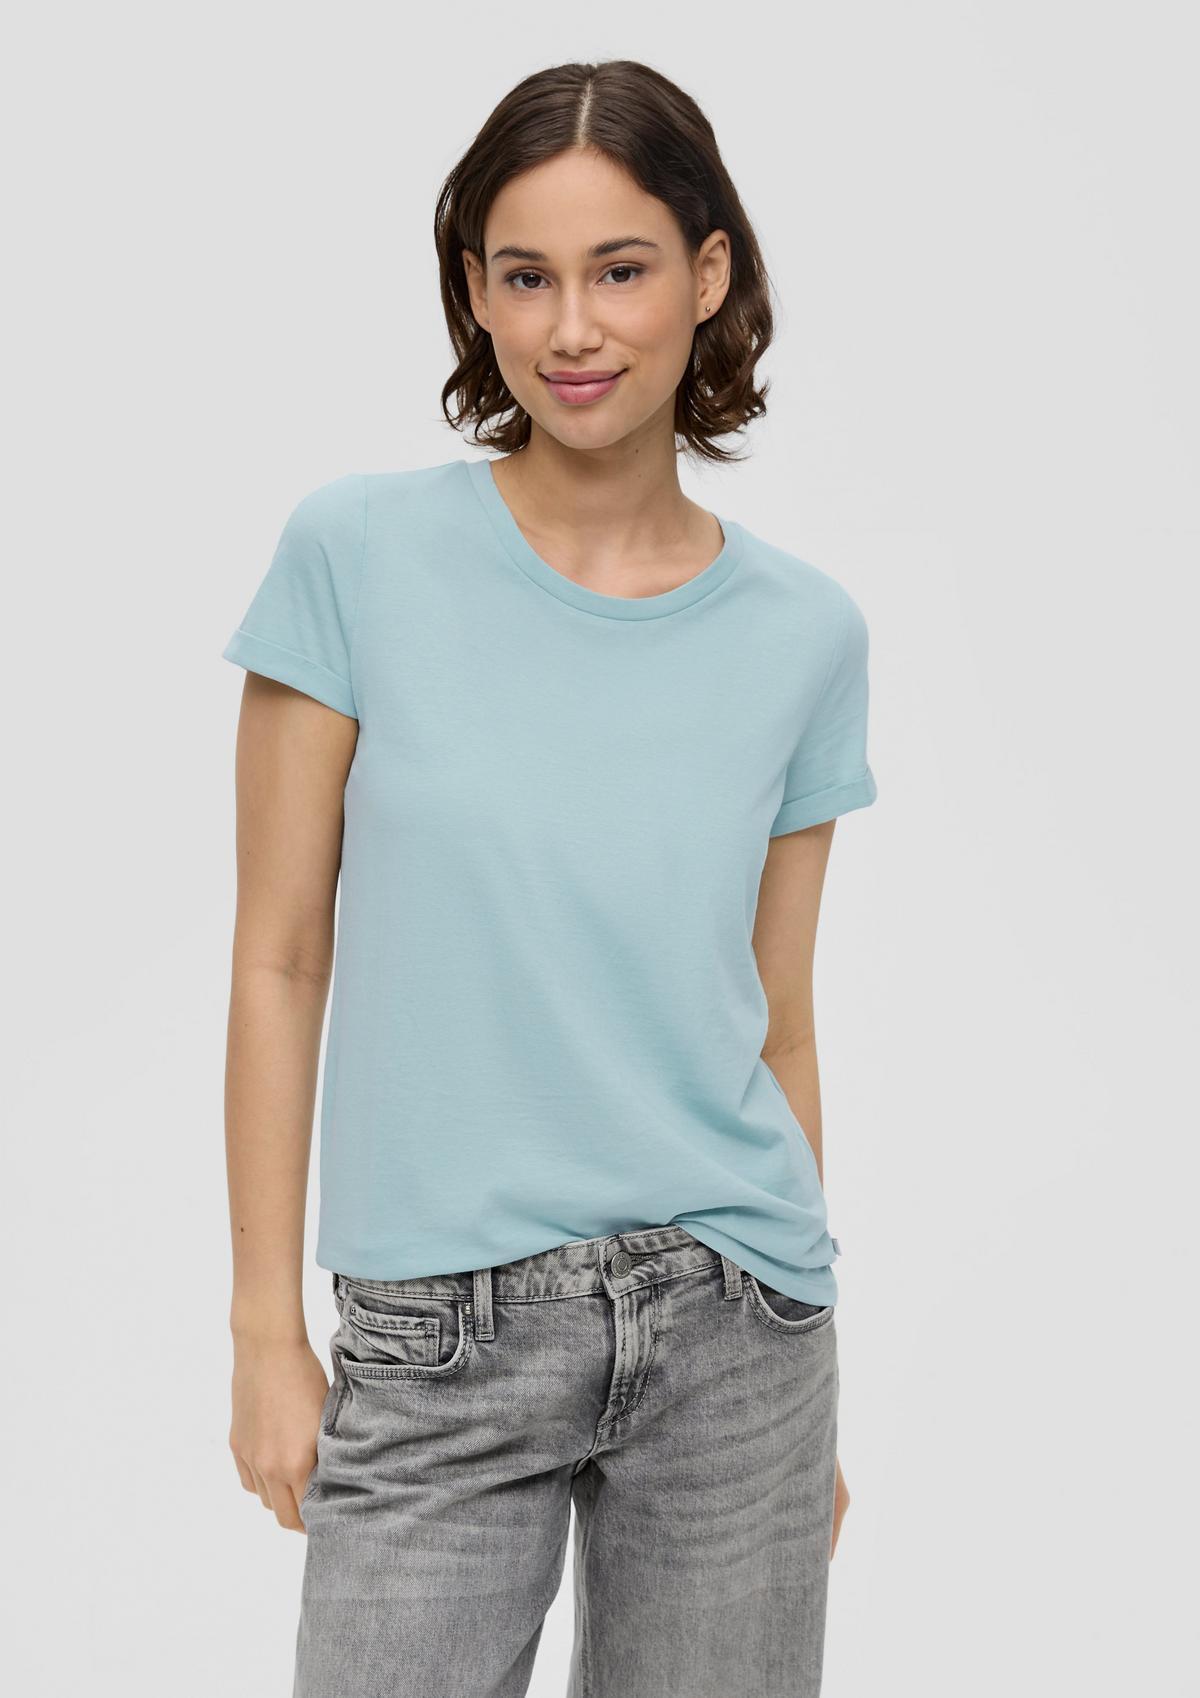 s.Oliver T-shirt with turned-up sleeves